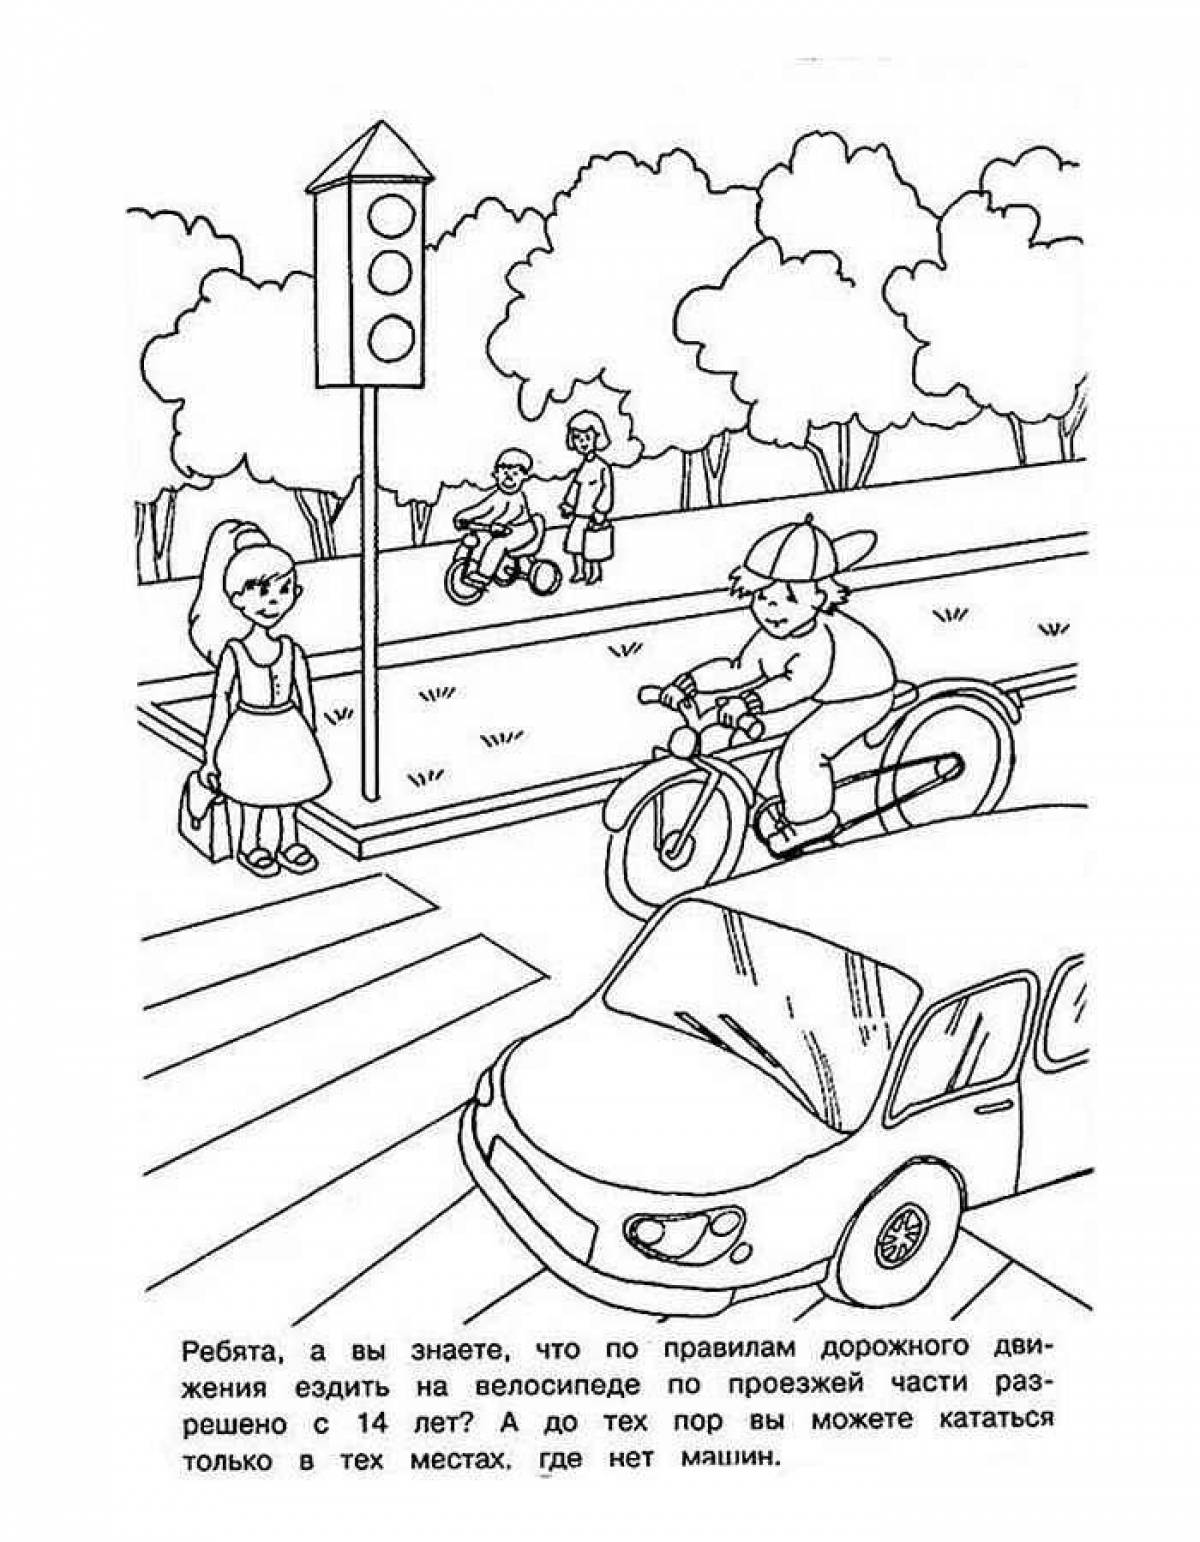 According to traffic rules for preschoolers #16